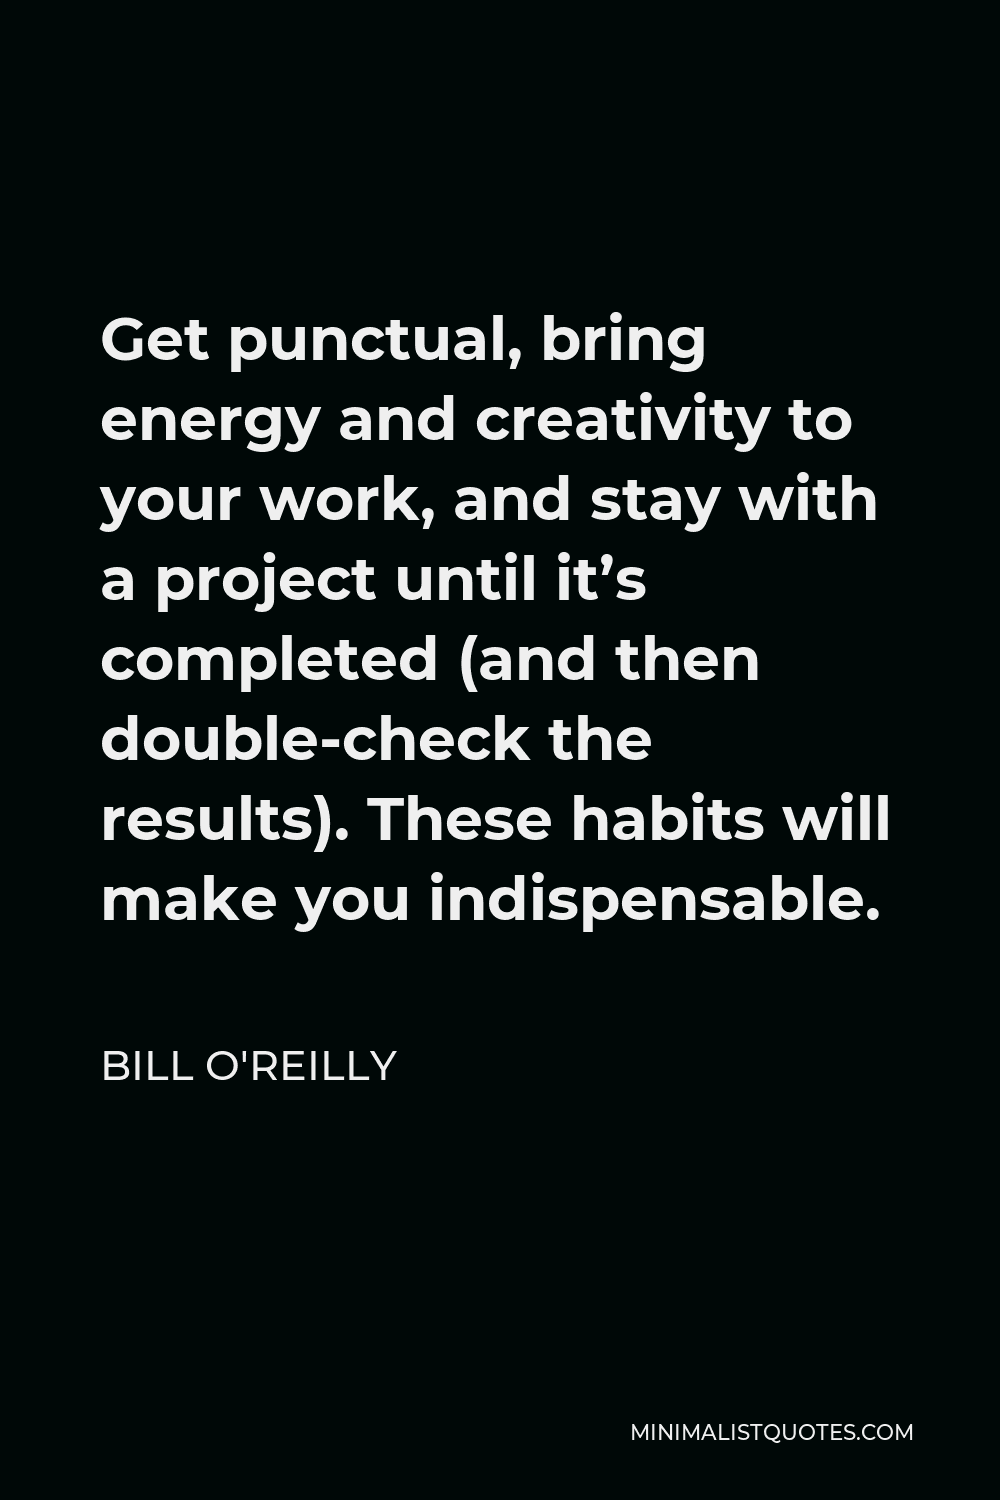 Bill O'Reilly Quote - Get punctual, bring energy and creativity to your work, and stay with a project until it’s completed (and then double-check the results). These habits will make you indispensable.